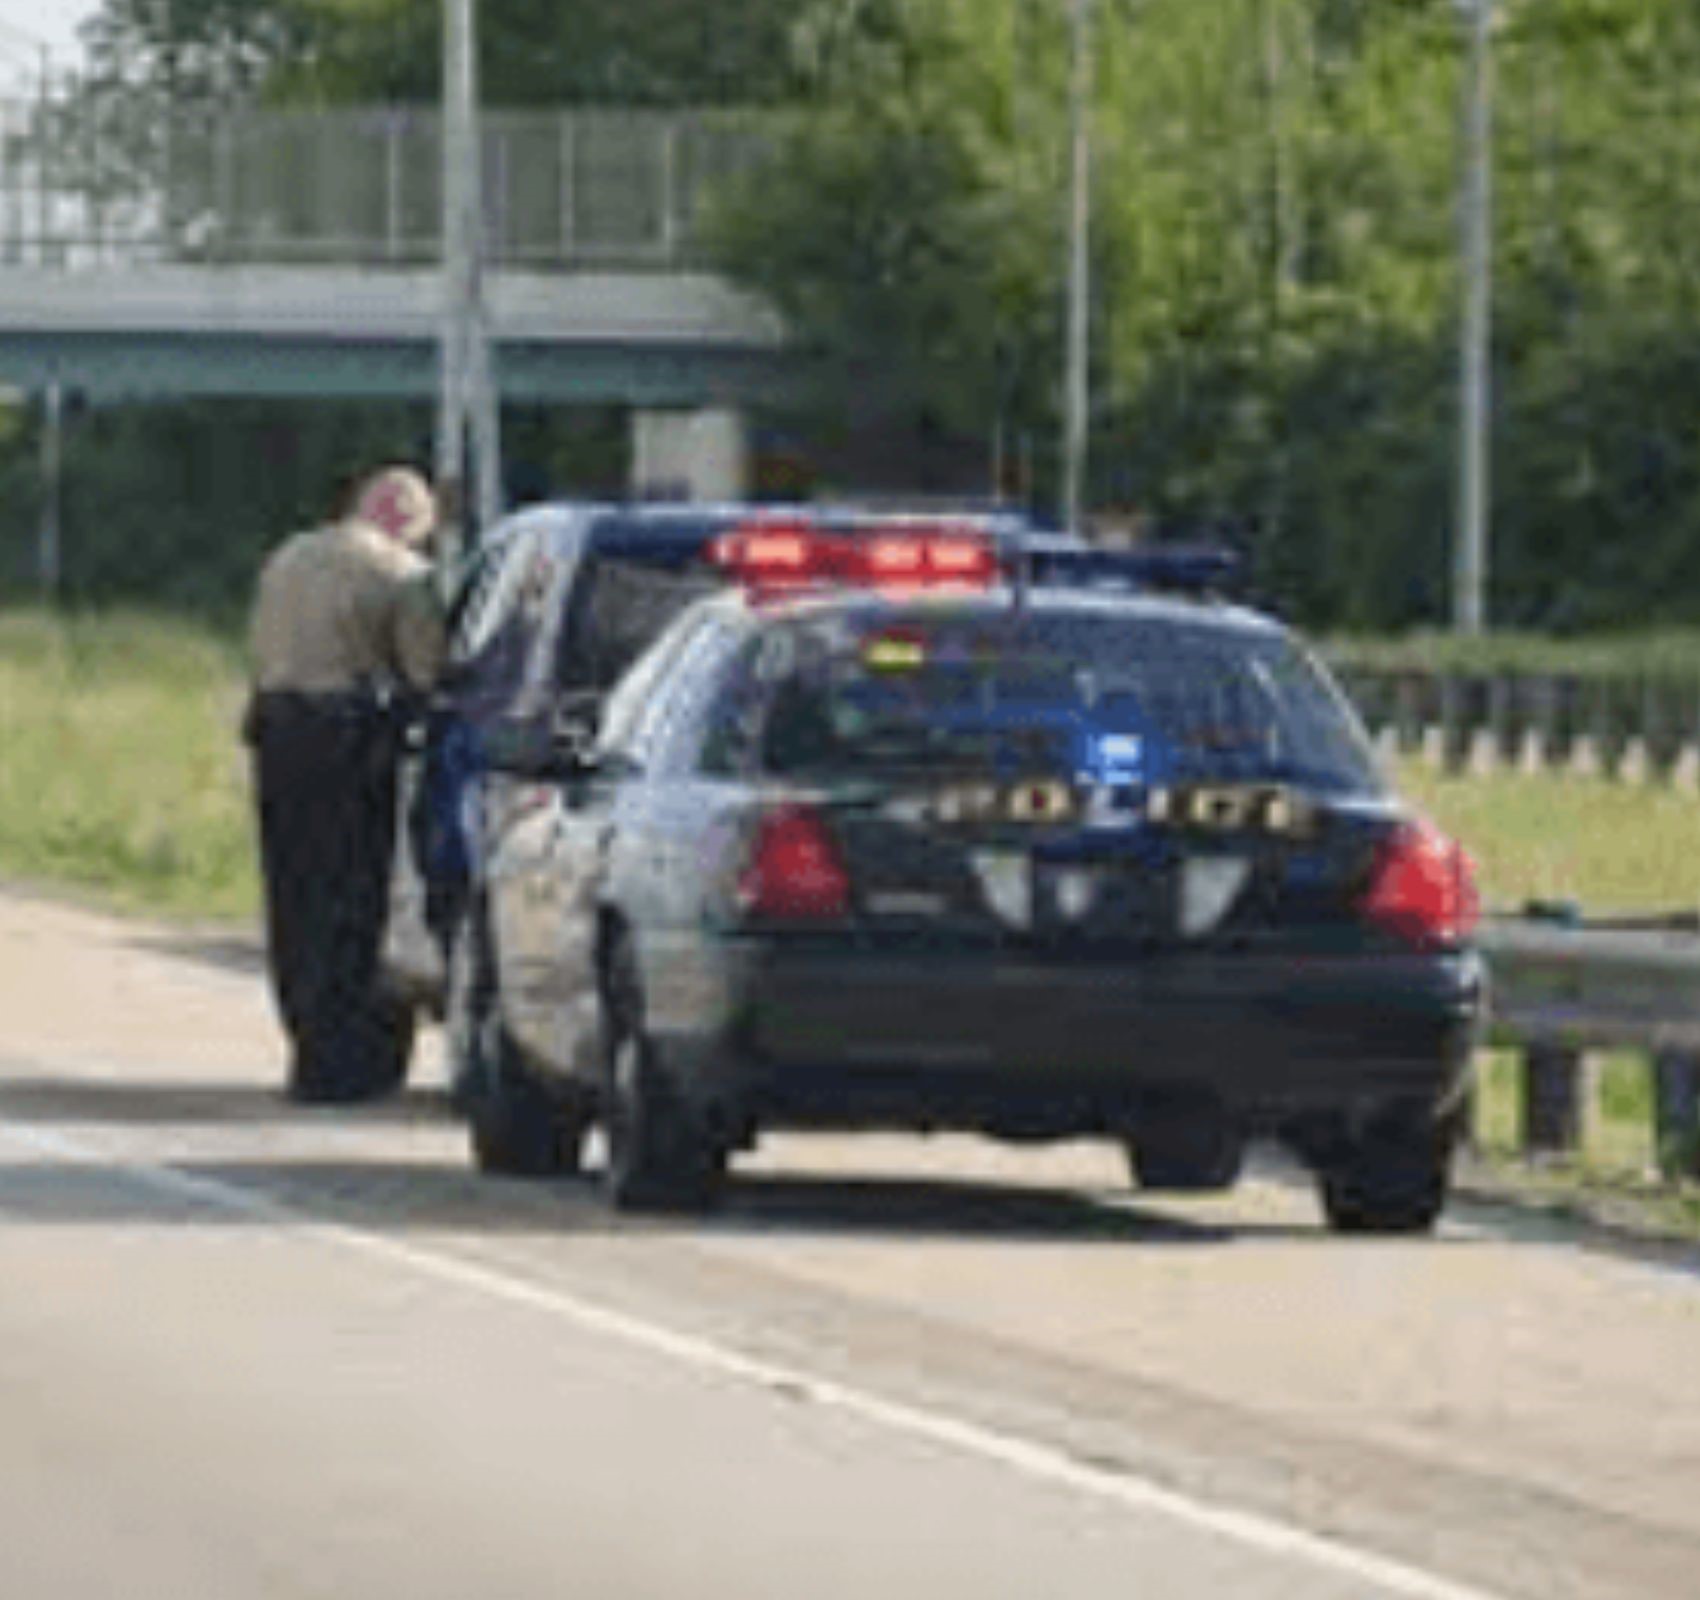 Why Should You Fight A Misdemeanor Traffic Ticket?